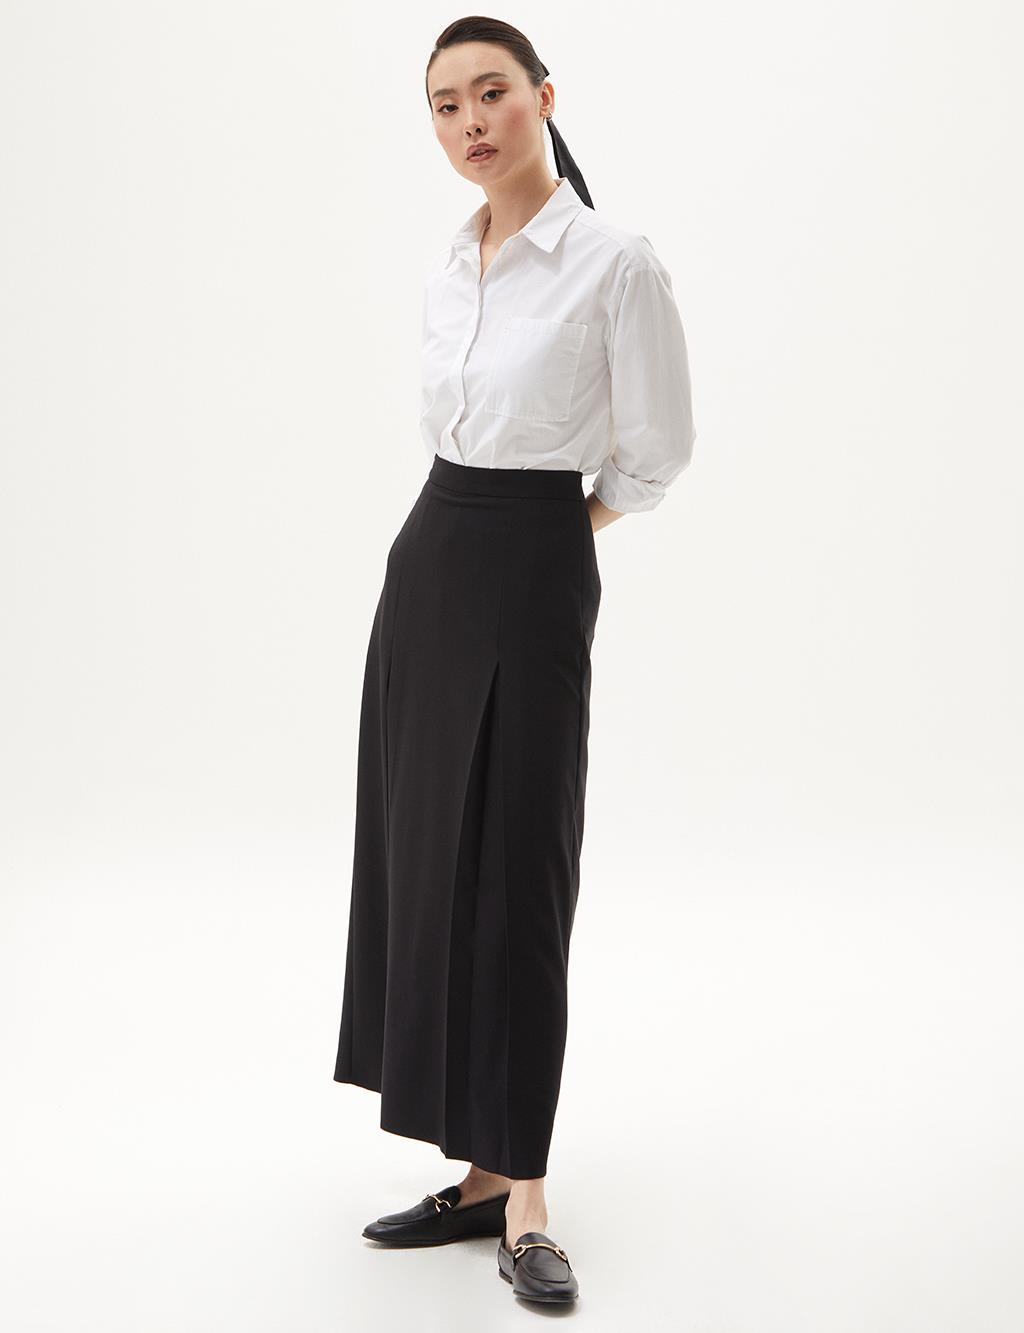 Front Double Pleated Skirt Black